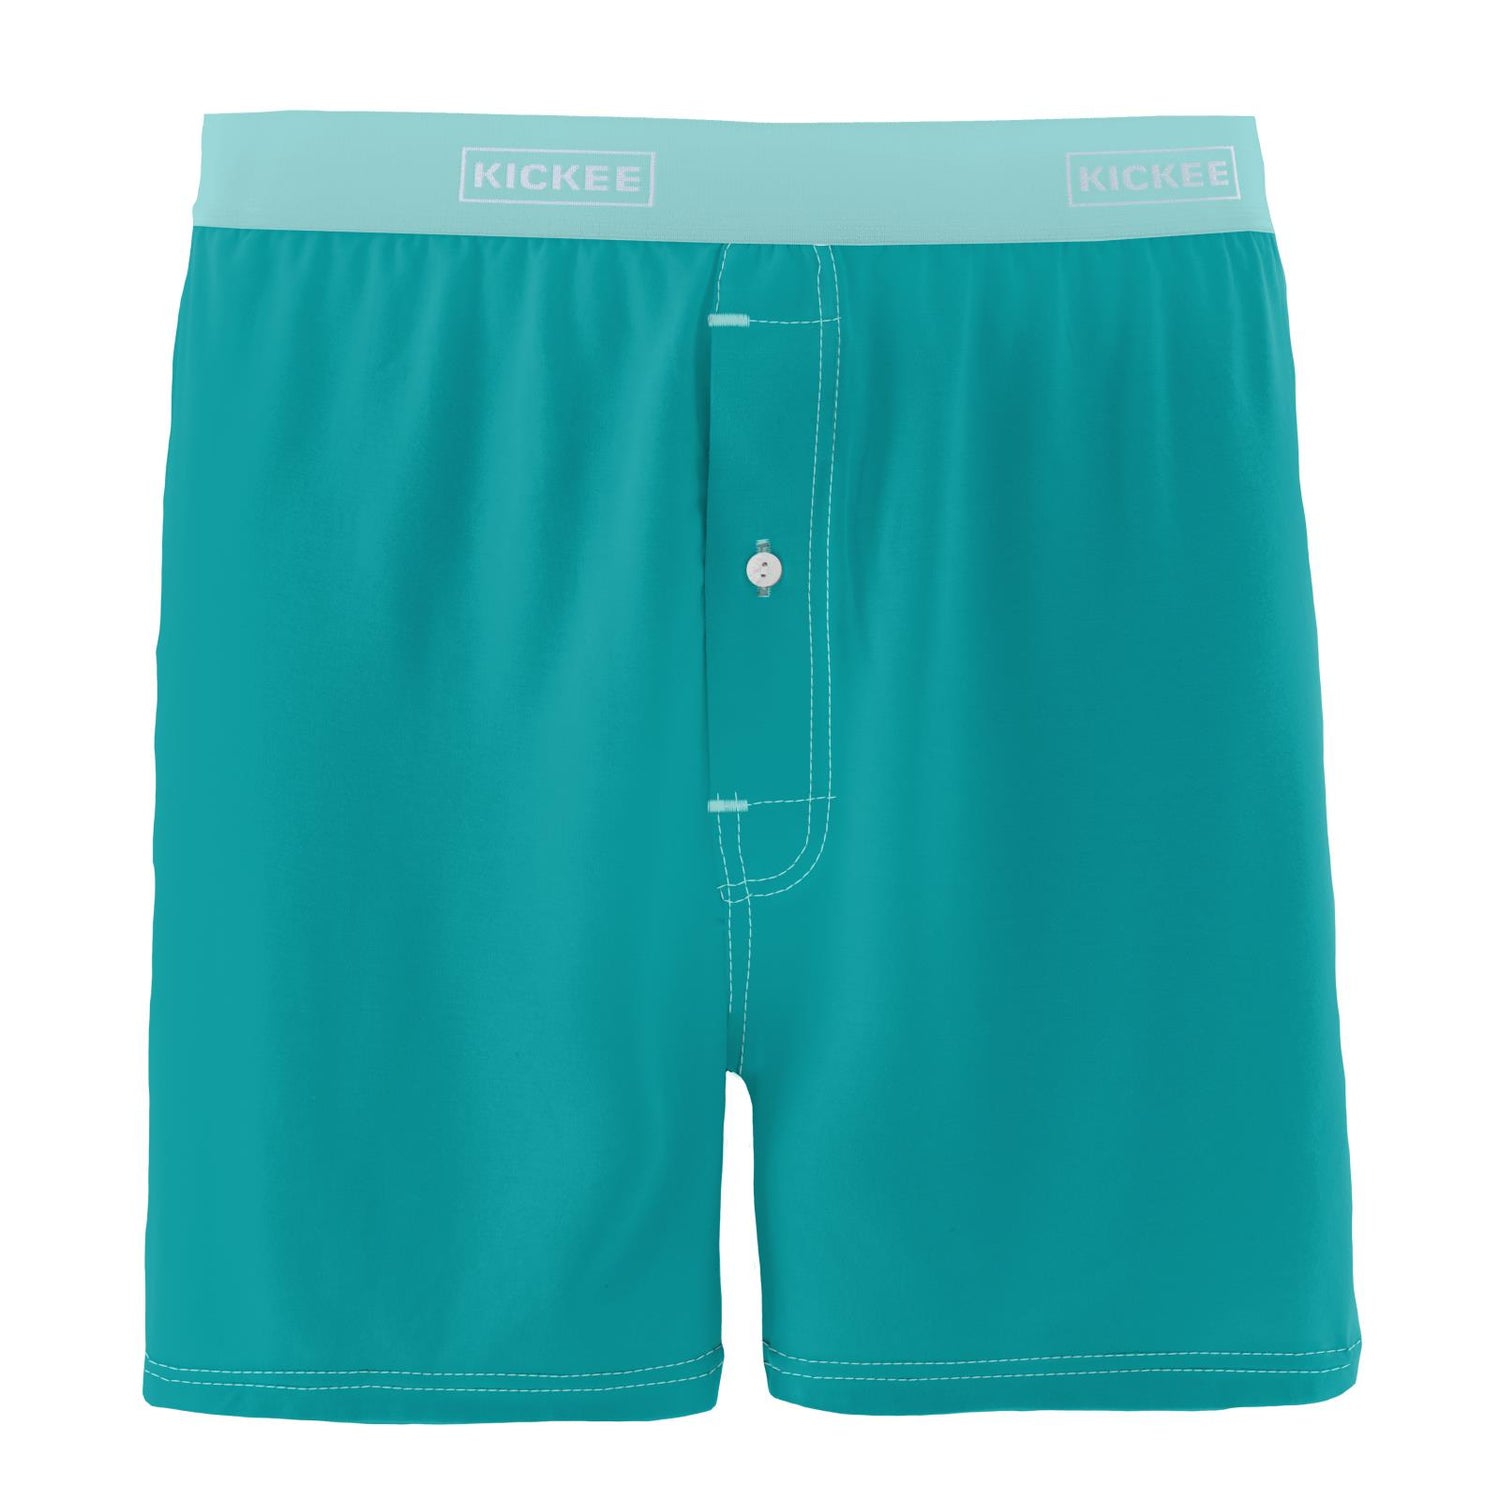 Men's Boxer Shorts in Neptune with Summer Sky